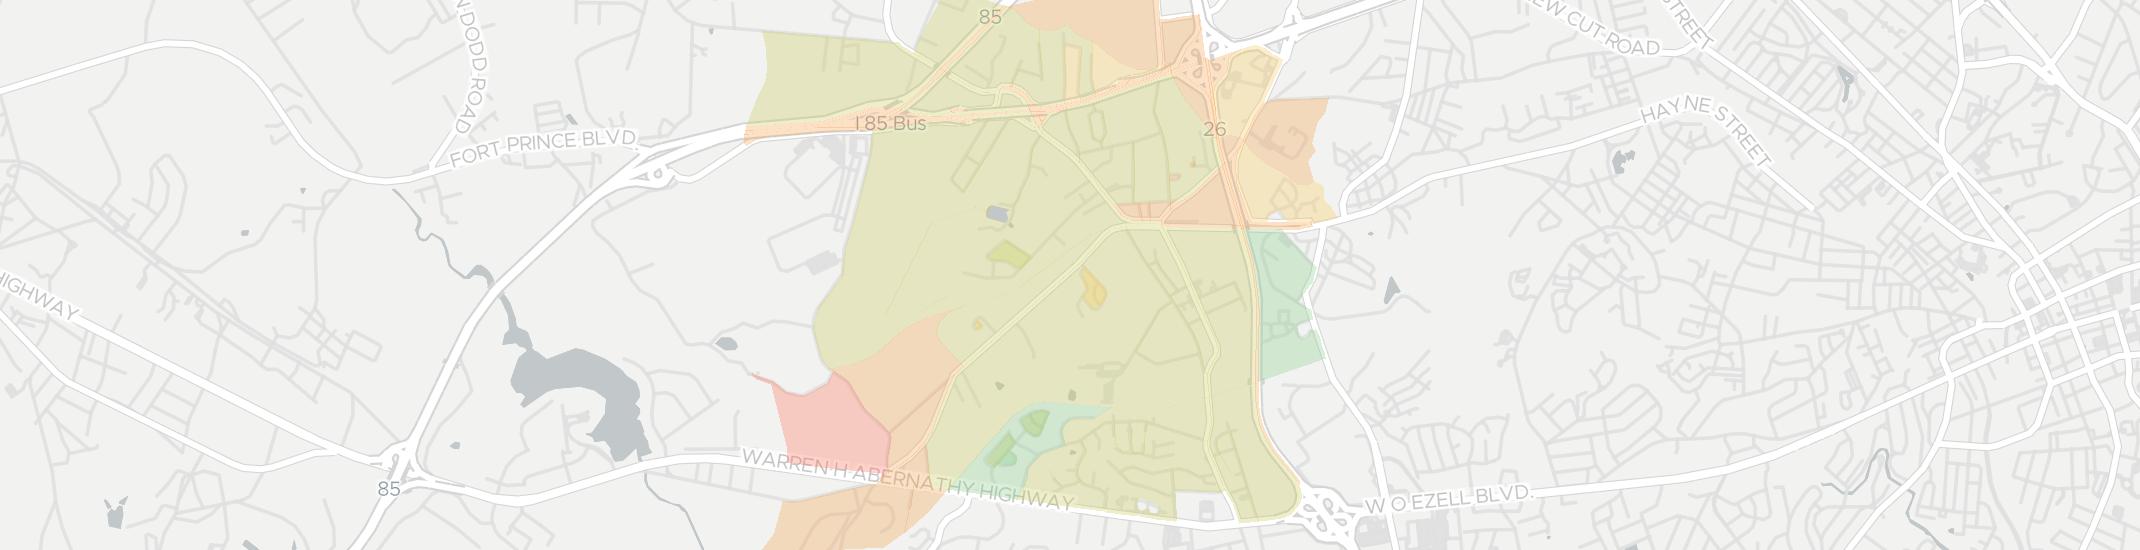 Fairforest Internet Competition Map. Click for interactive map.